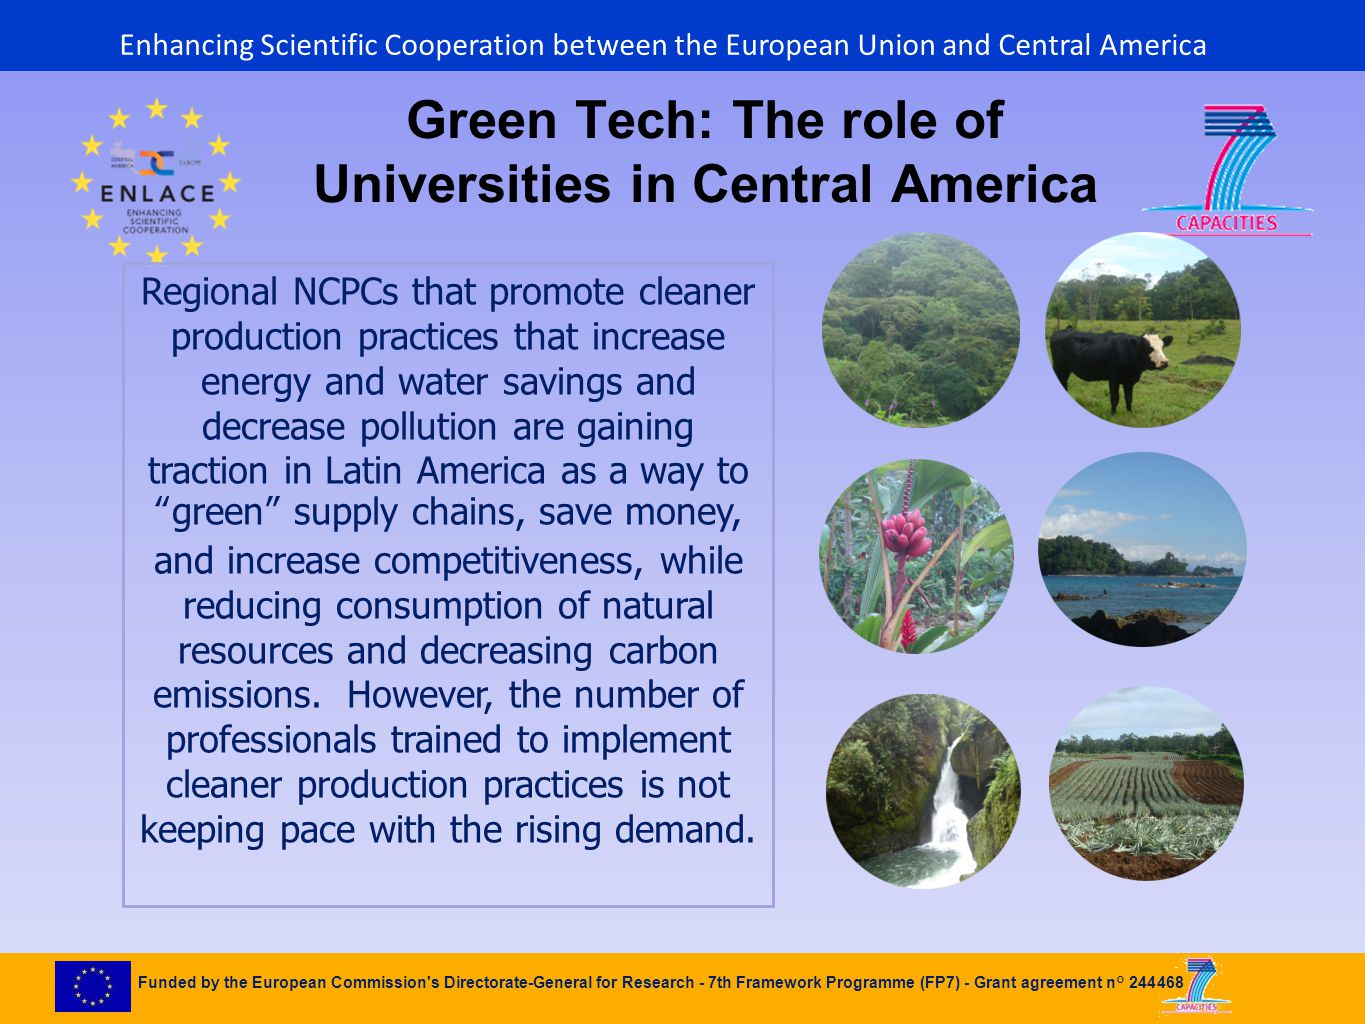 Funded by the European Commission s Directorate-General for Research - 7th Framework Programme (FP7) - Grant agreement n° Green Tech: The role of Universities in Central America Regional NCPCs that promote cleaner production practices that increase energy and water savings and decrease pollution are gaining traction in Latin America as a way to green supply chains, save money, and increase competitiveness, while reducing consumption of natural resources and decreasing carbon emissions.